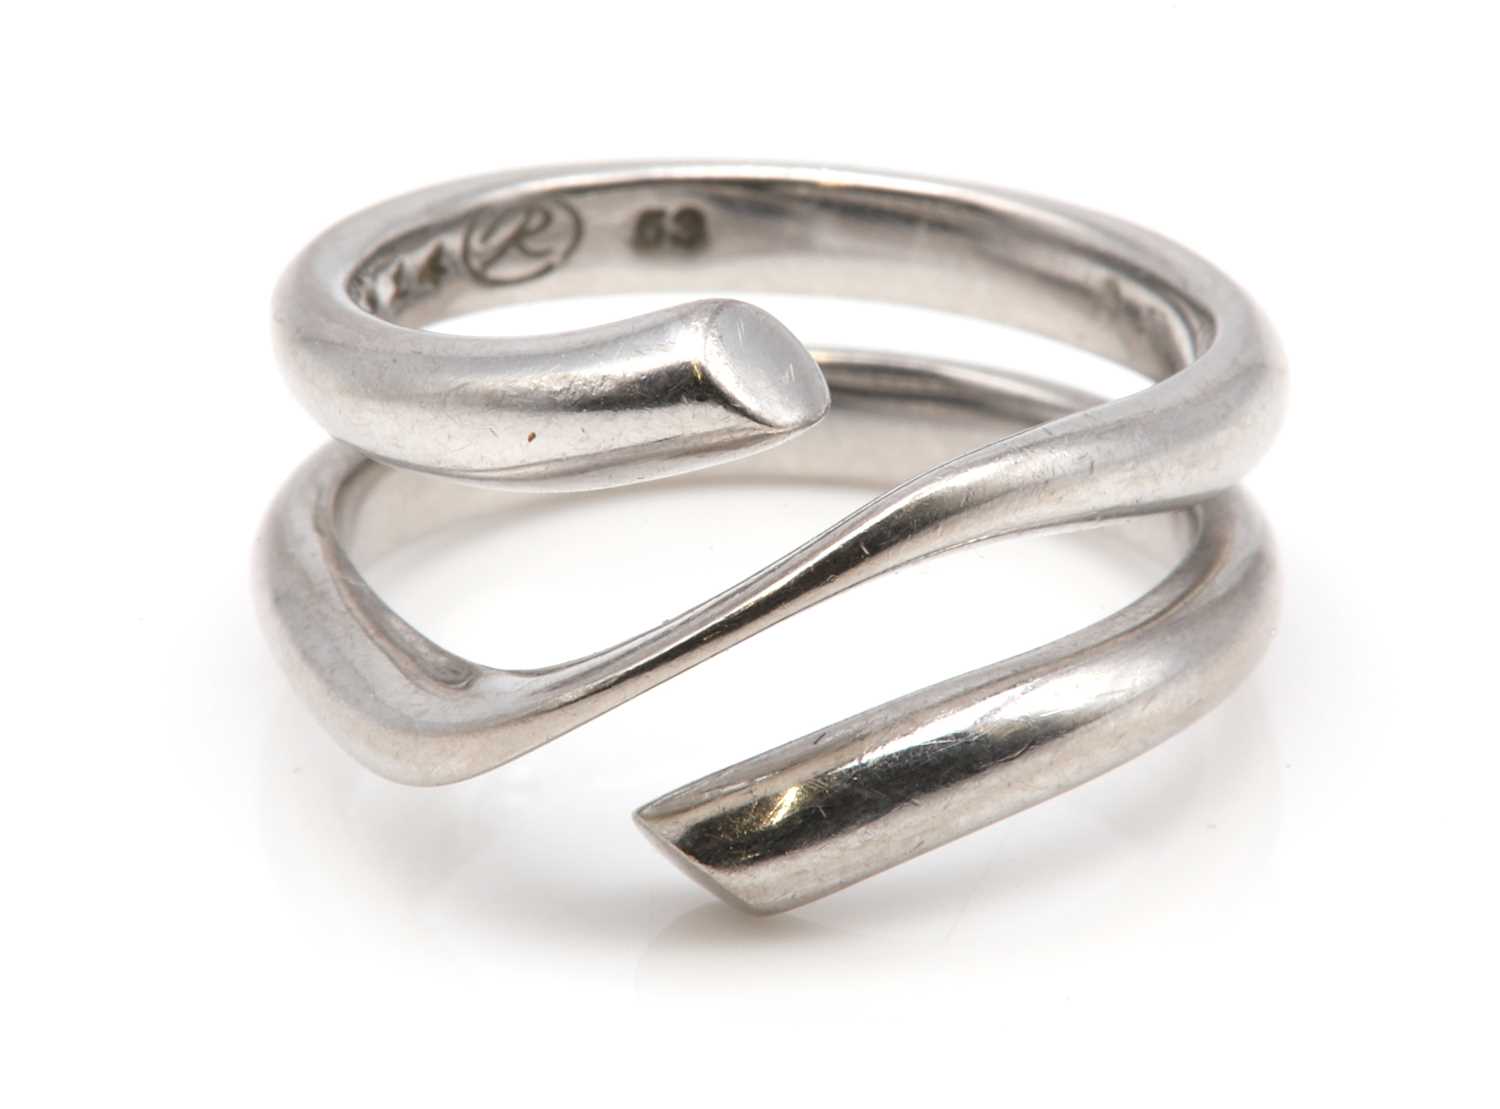 Lot 452 - An 18ct white gold 'Magic' ring, by Georg Jensen